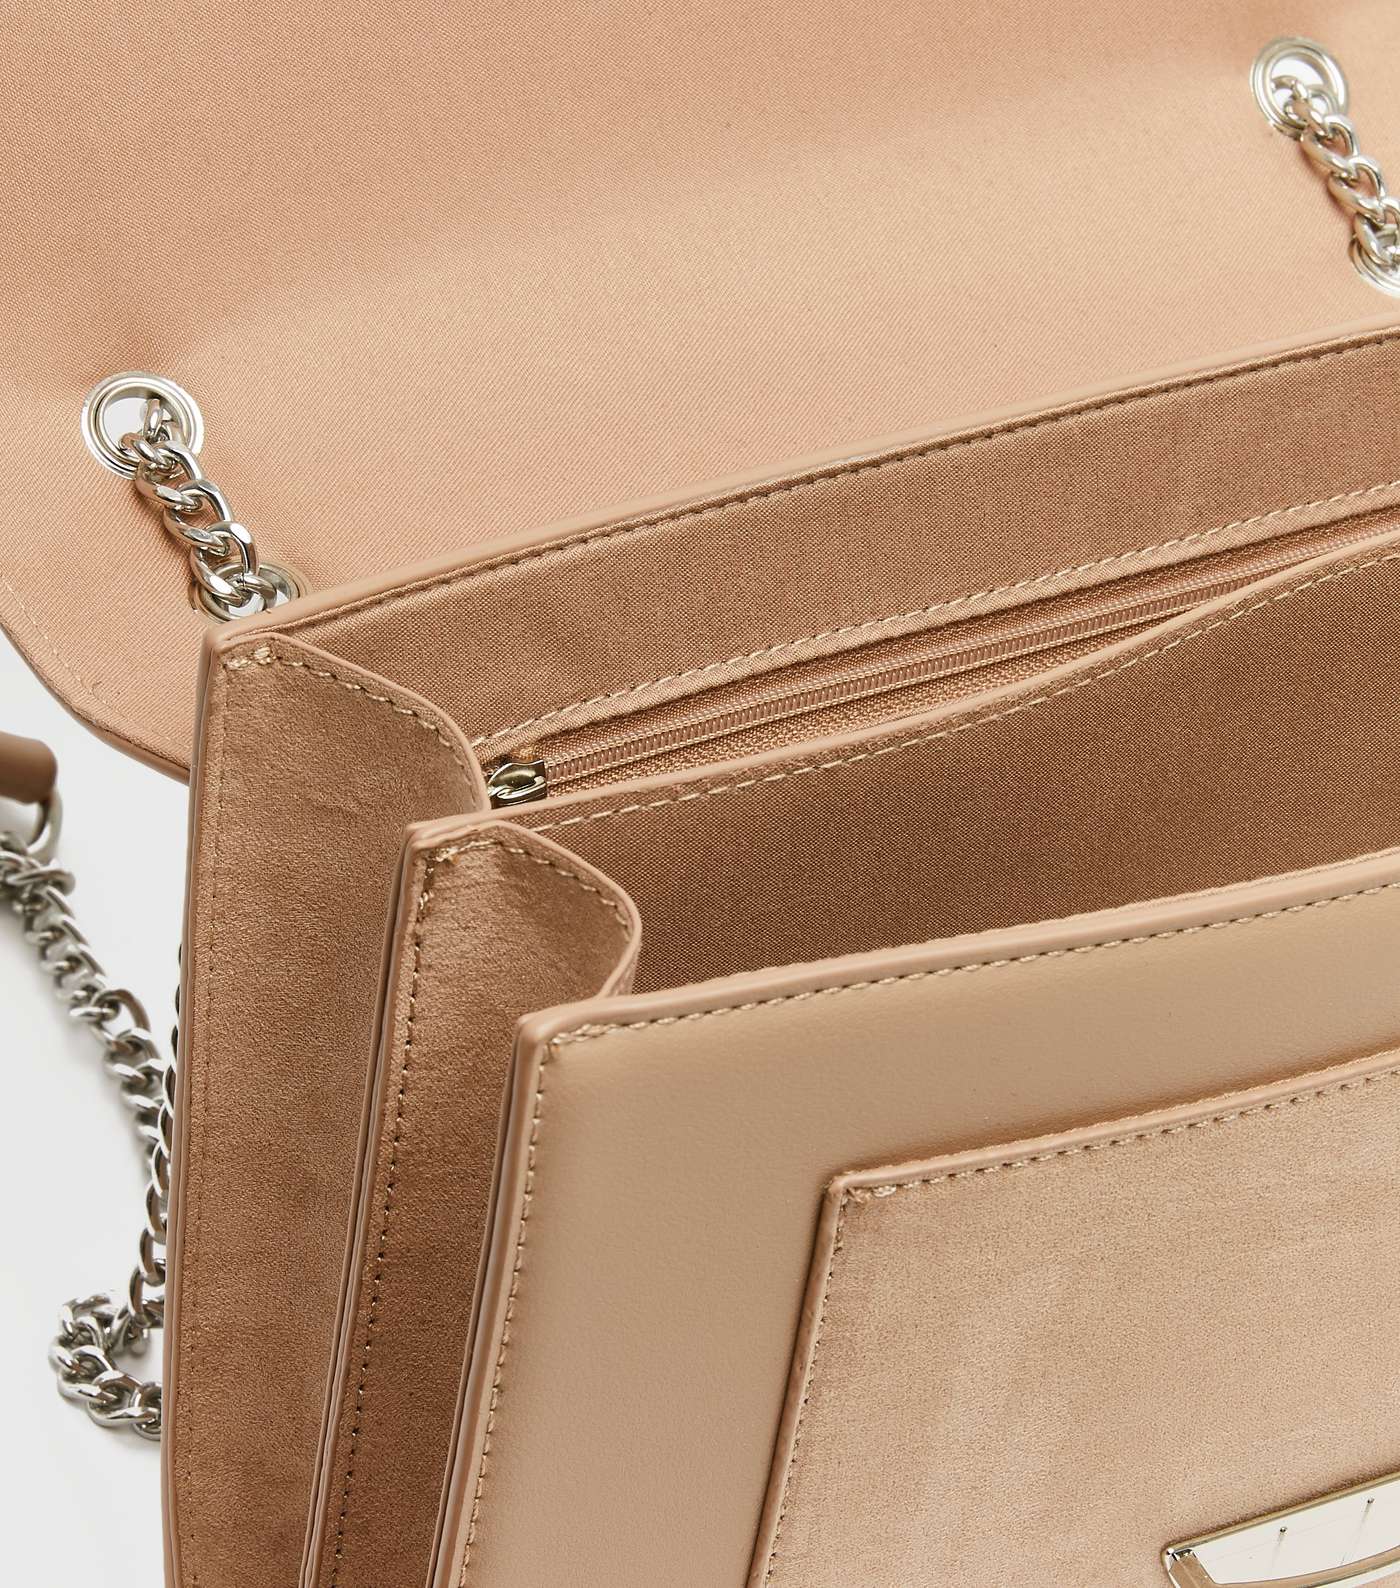 Tan Leather-Look Studded Chain Strap Bag Image 3